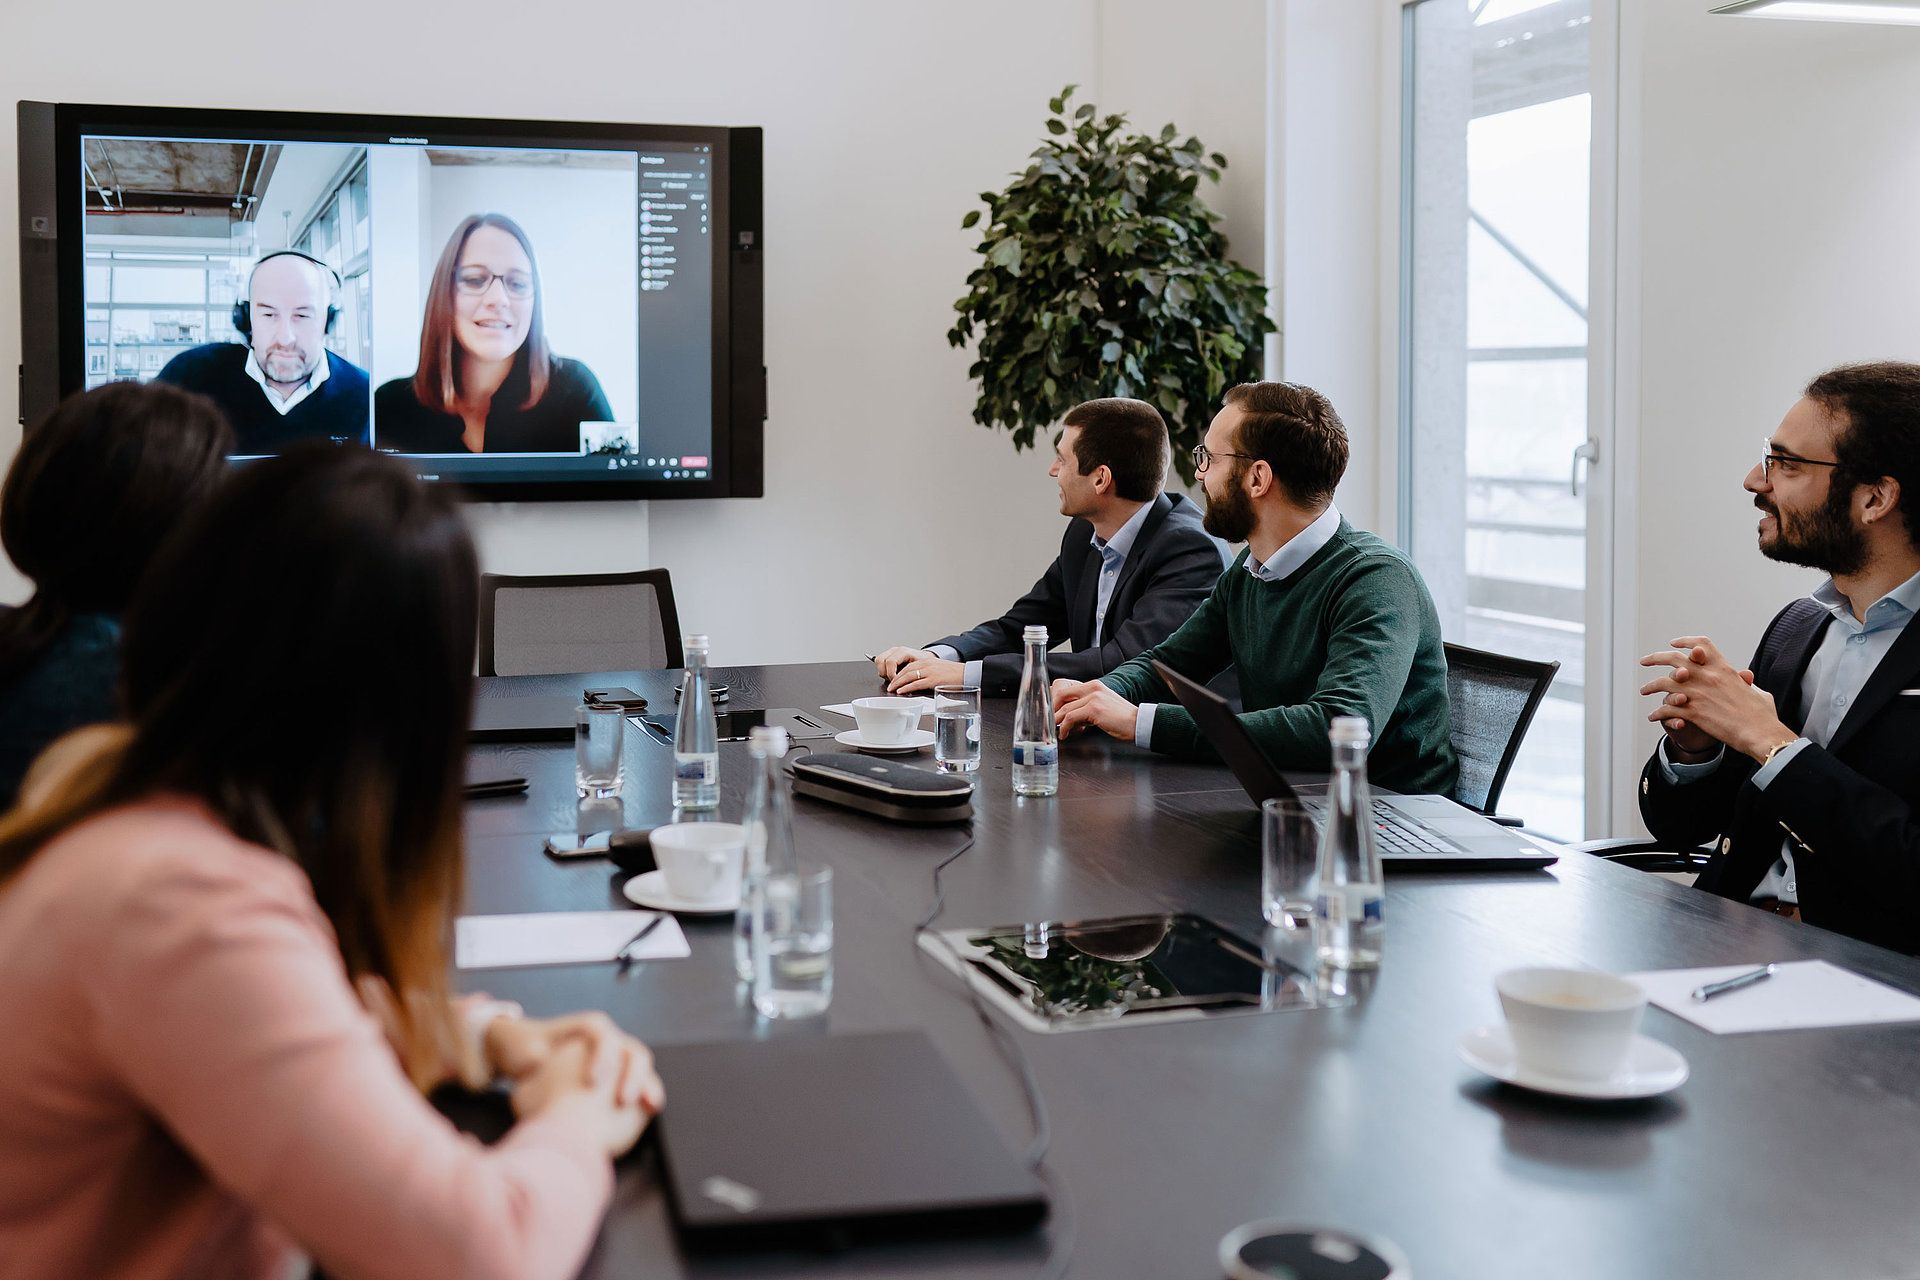 A meeting in the office with staff on video call